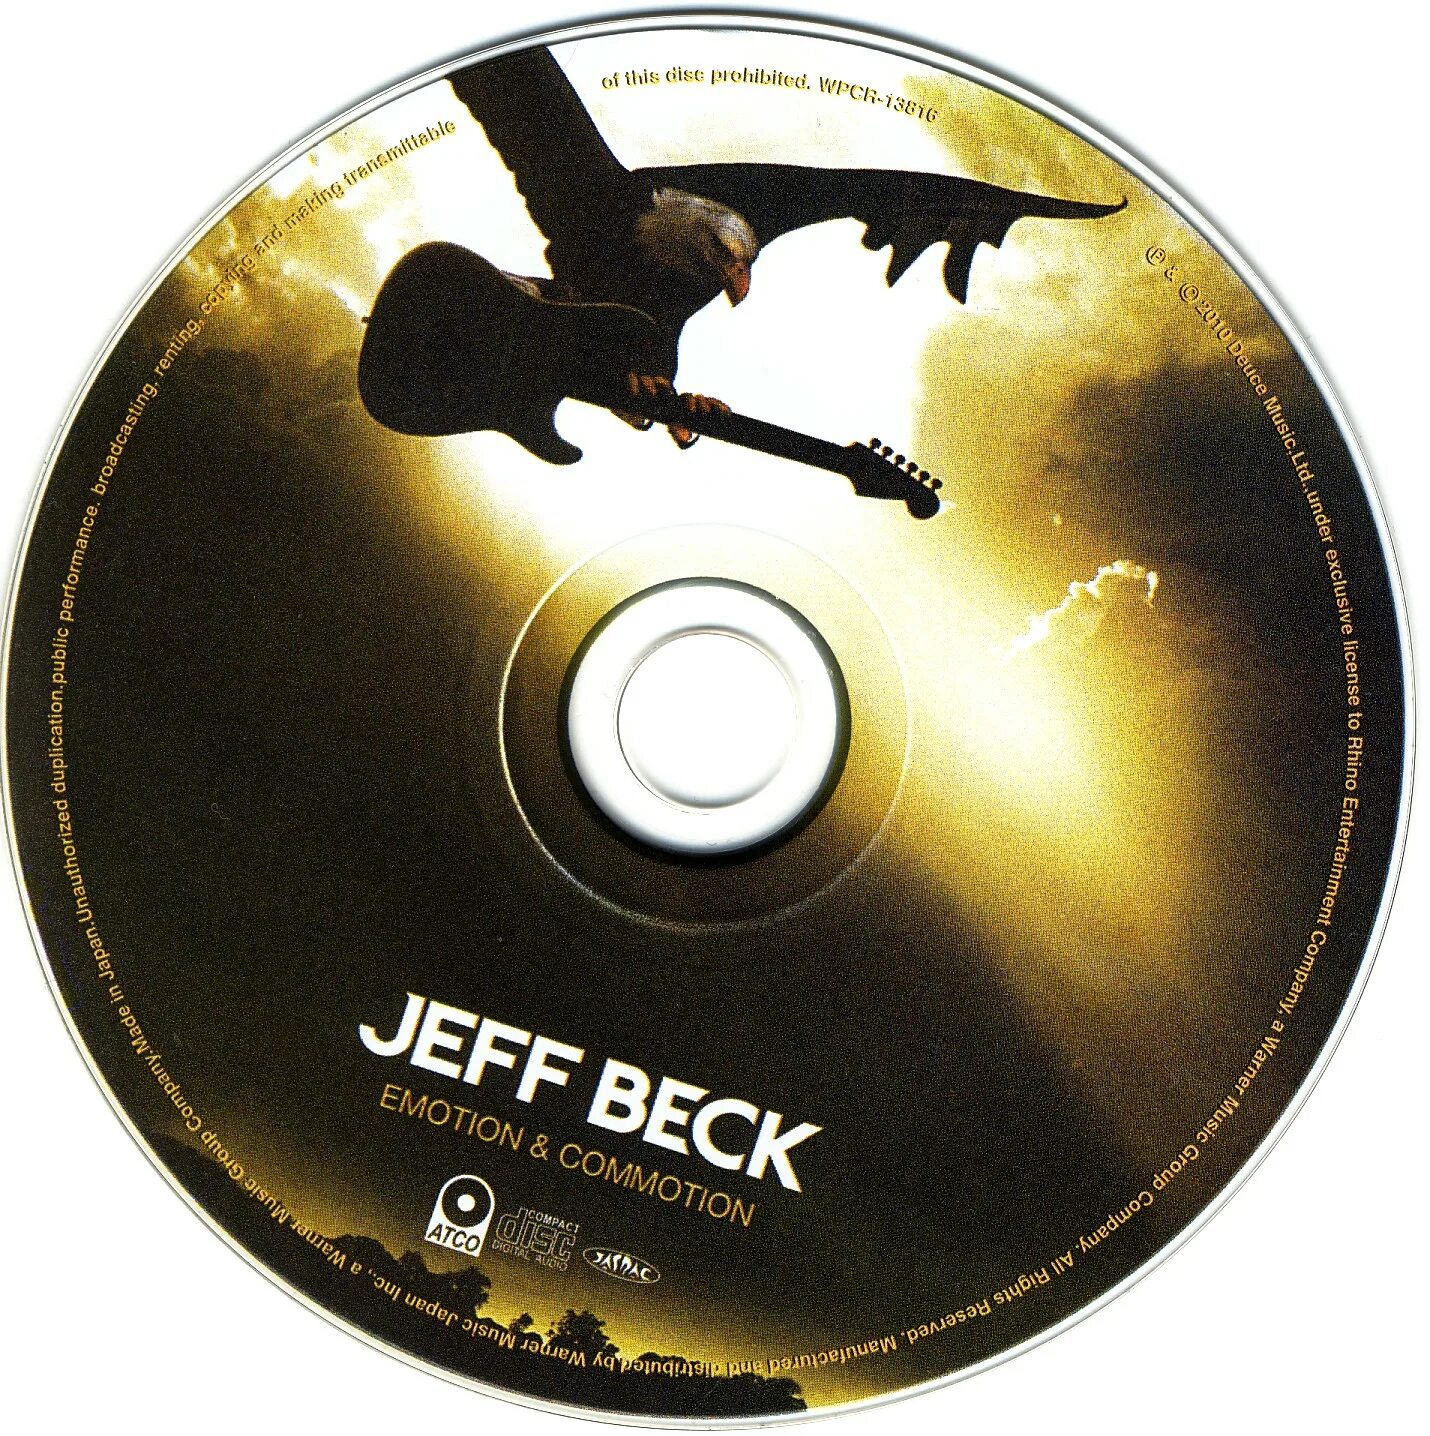 Flac 2010. Jeff Beck - emotion and Commotion (2010). Jeff Beck 2022. Jeff Beck 2010. Jeff Beck - emotion and Commotion ' 2010 CD Covers.